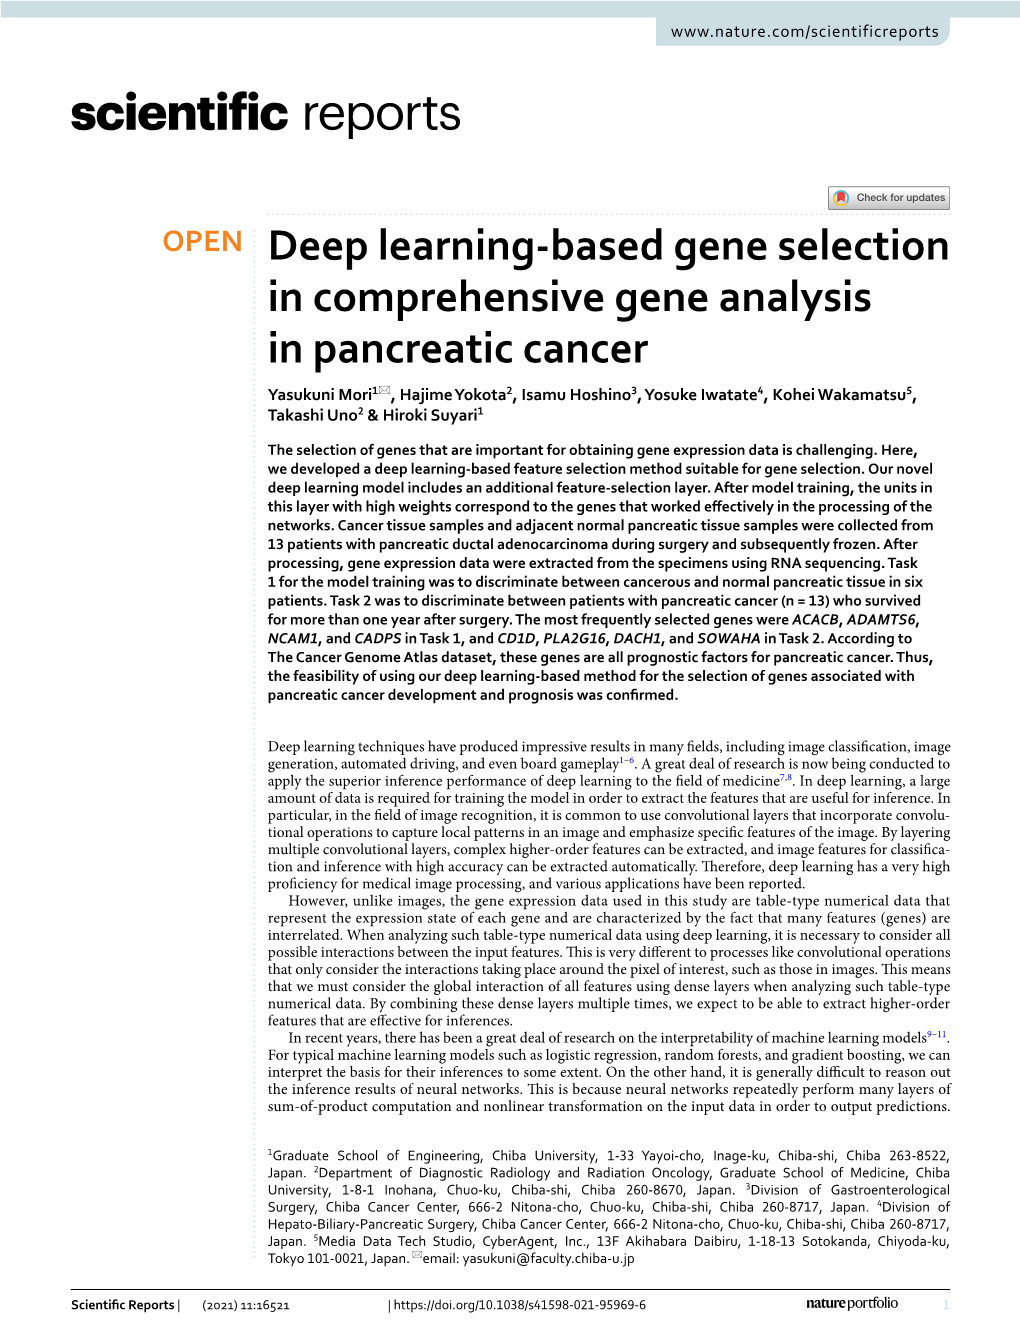 Deep Learning-Based Gene Selection in Comprehensive Gene Analysis In